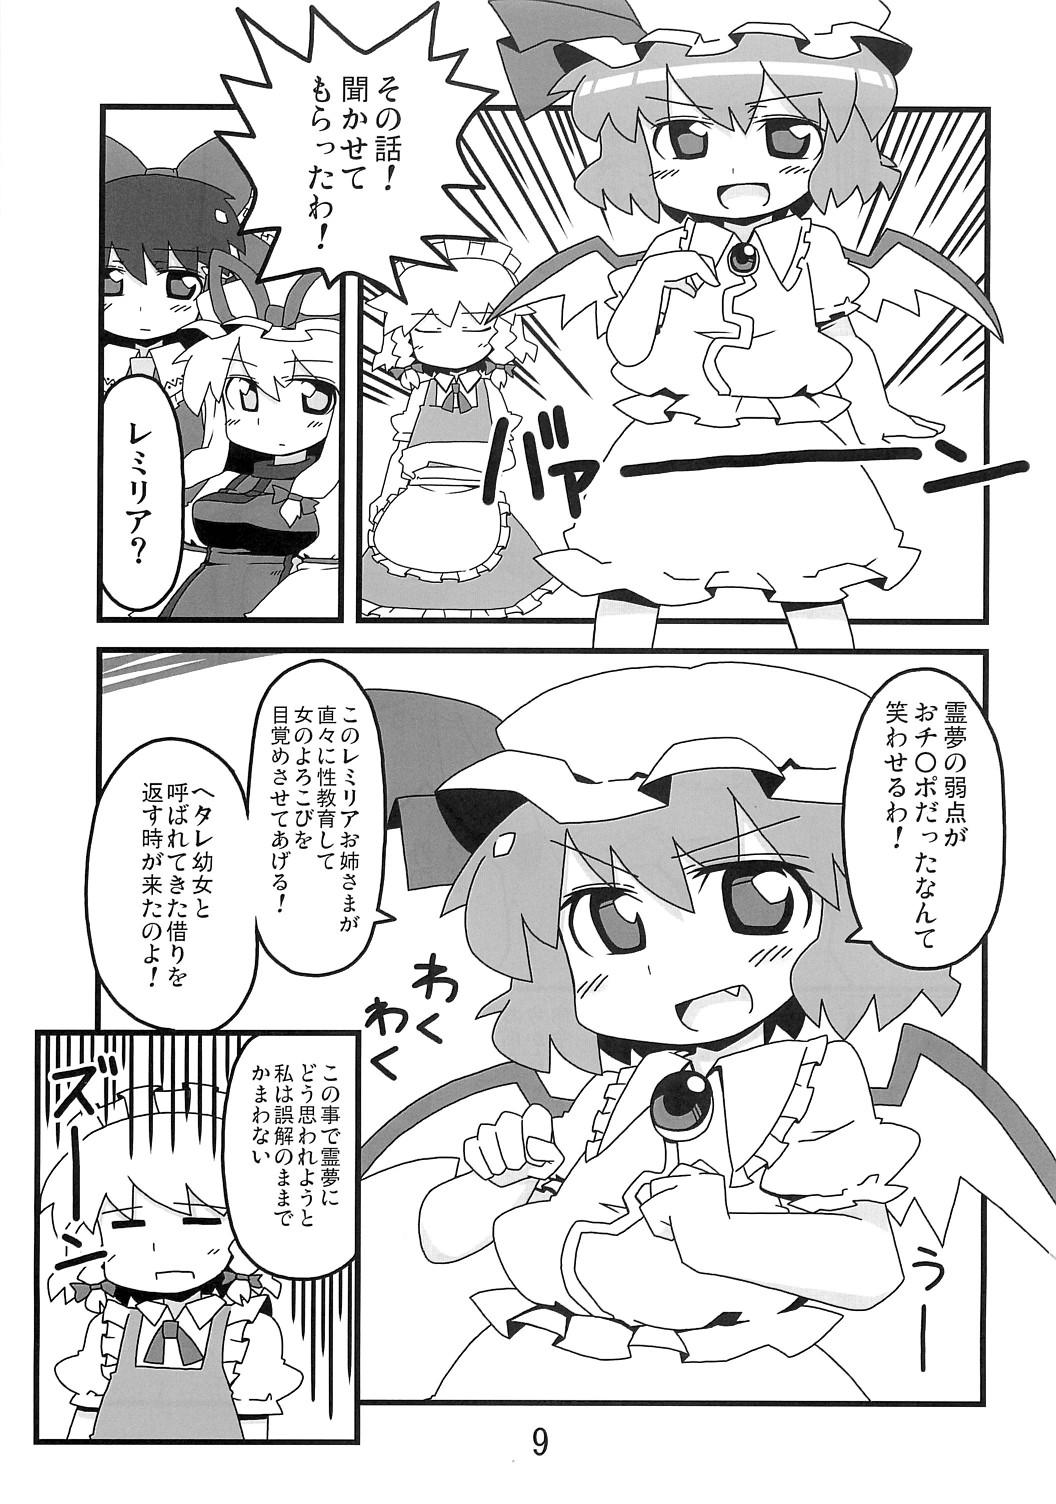 Russia 東方豊年祭 - Touhou project Shemale Sex - Page 8